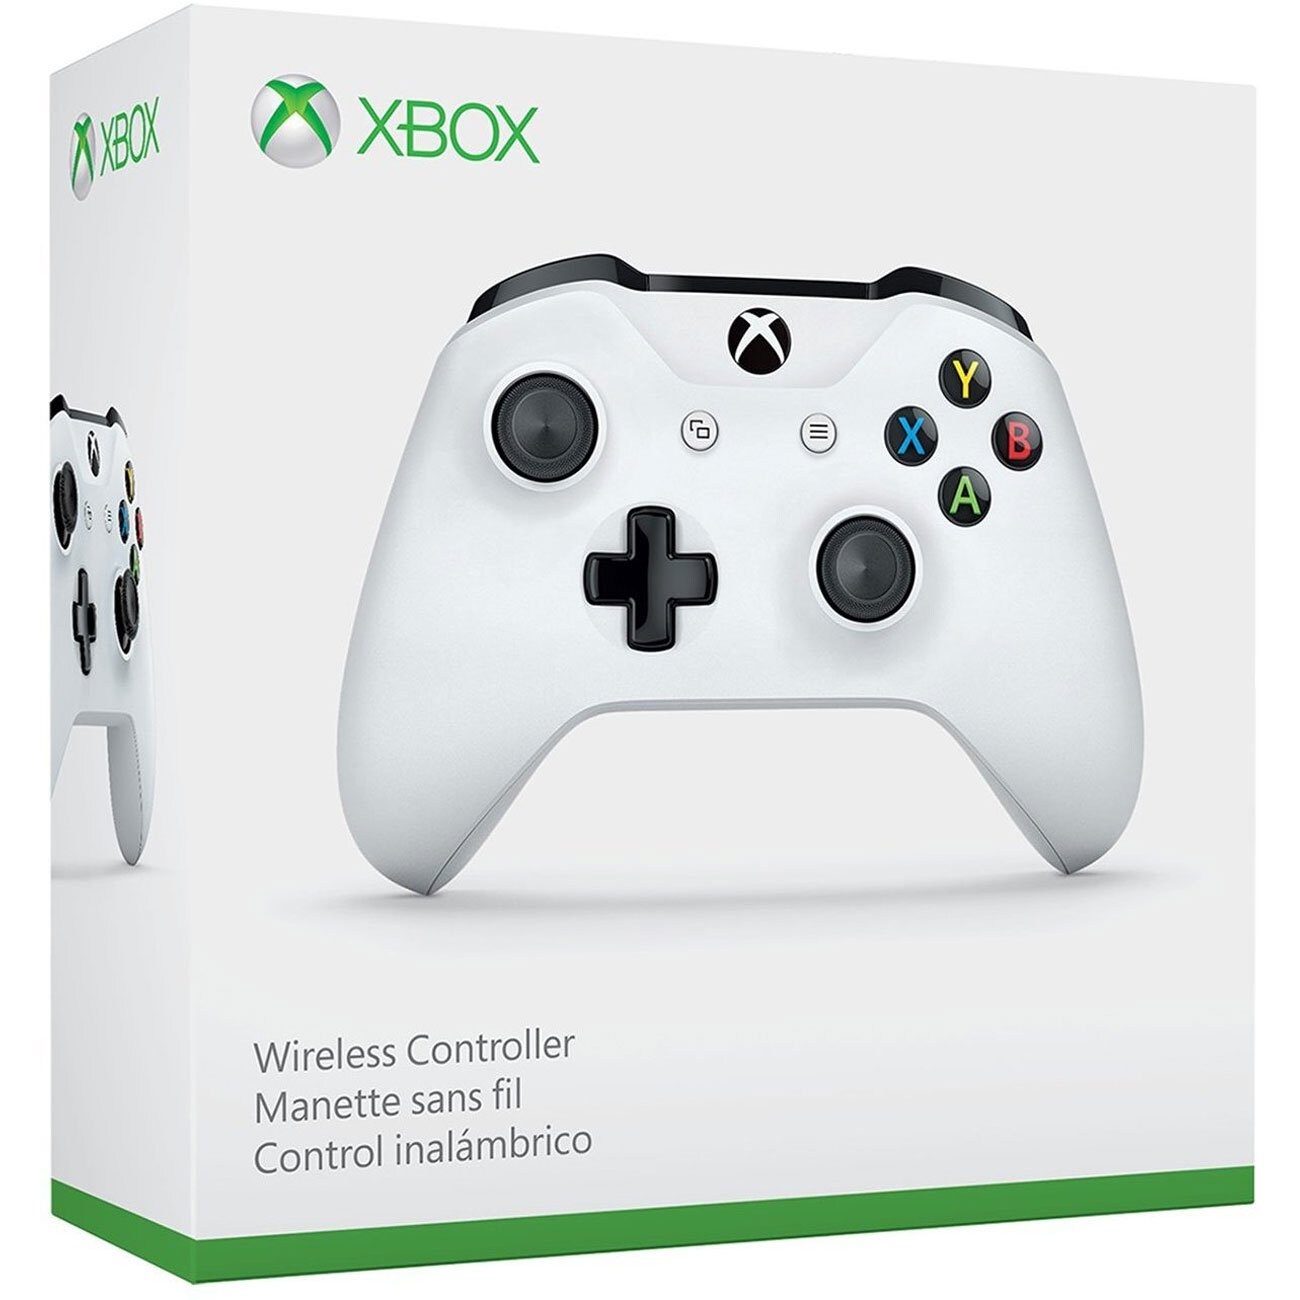 Xbox One Controller Wireless 6-Axis Dual Vibration Joystick Gamepad For Xbox One Slim Console /PC Win 7 8 10 White - 3